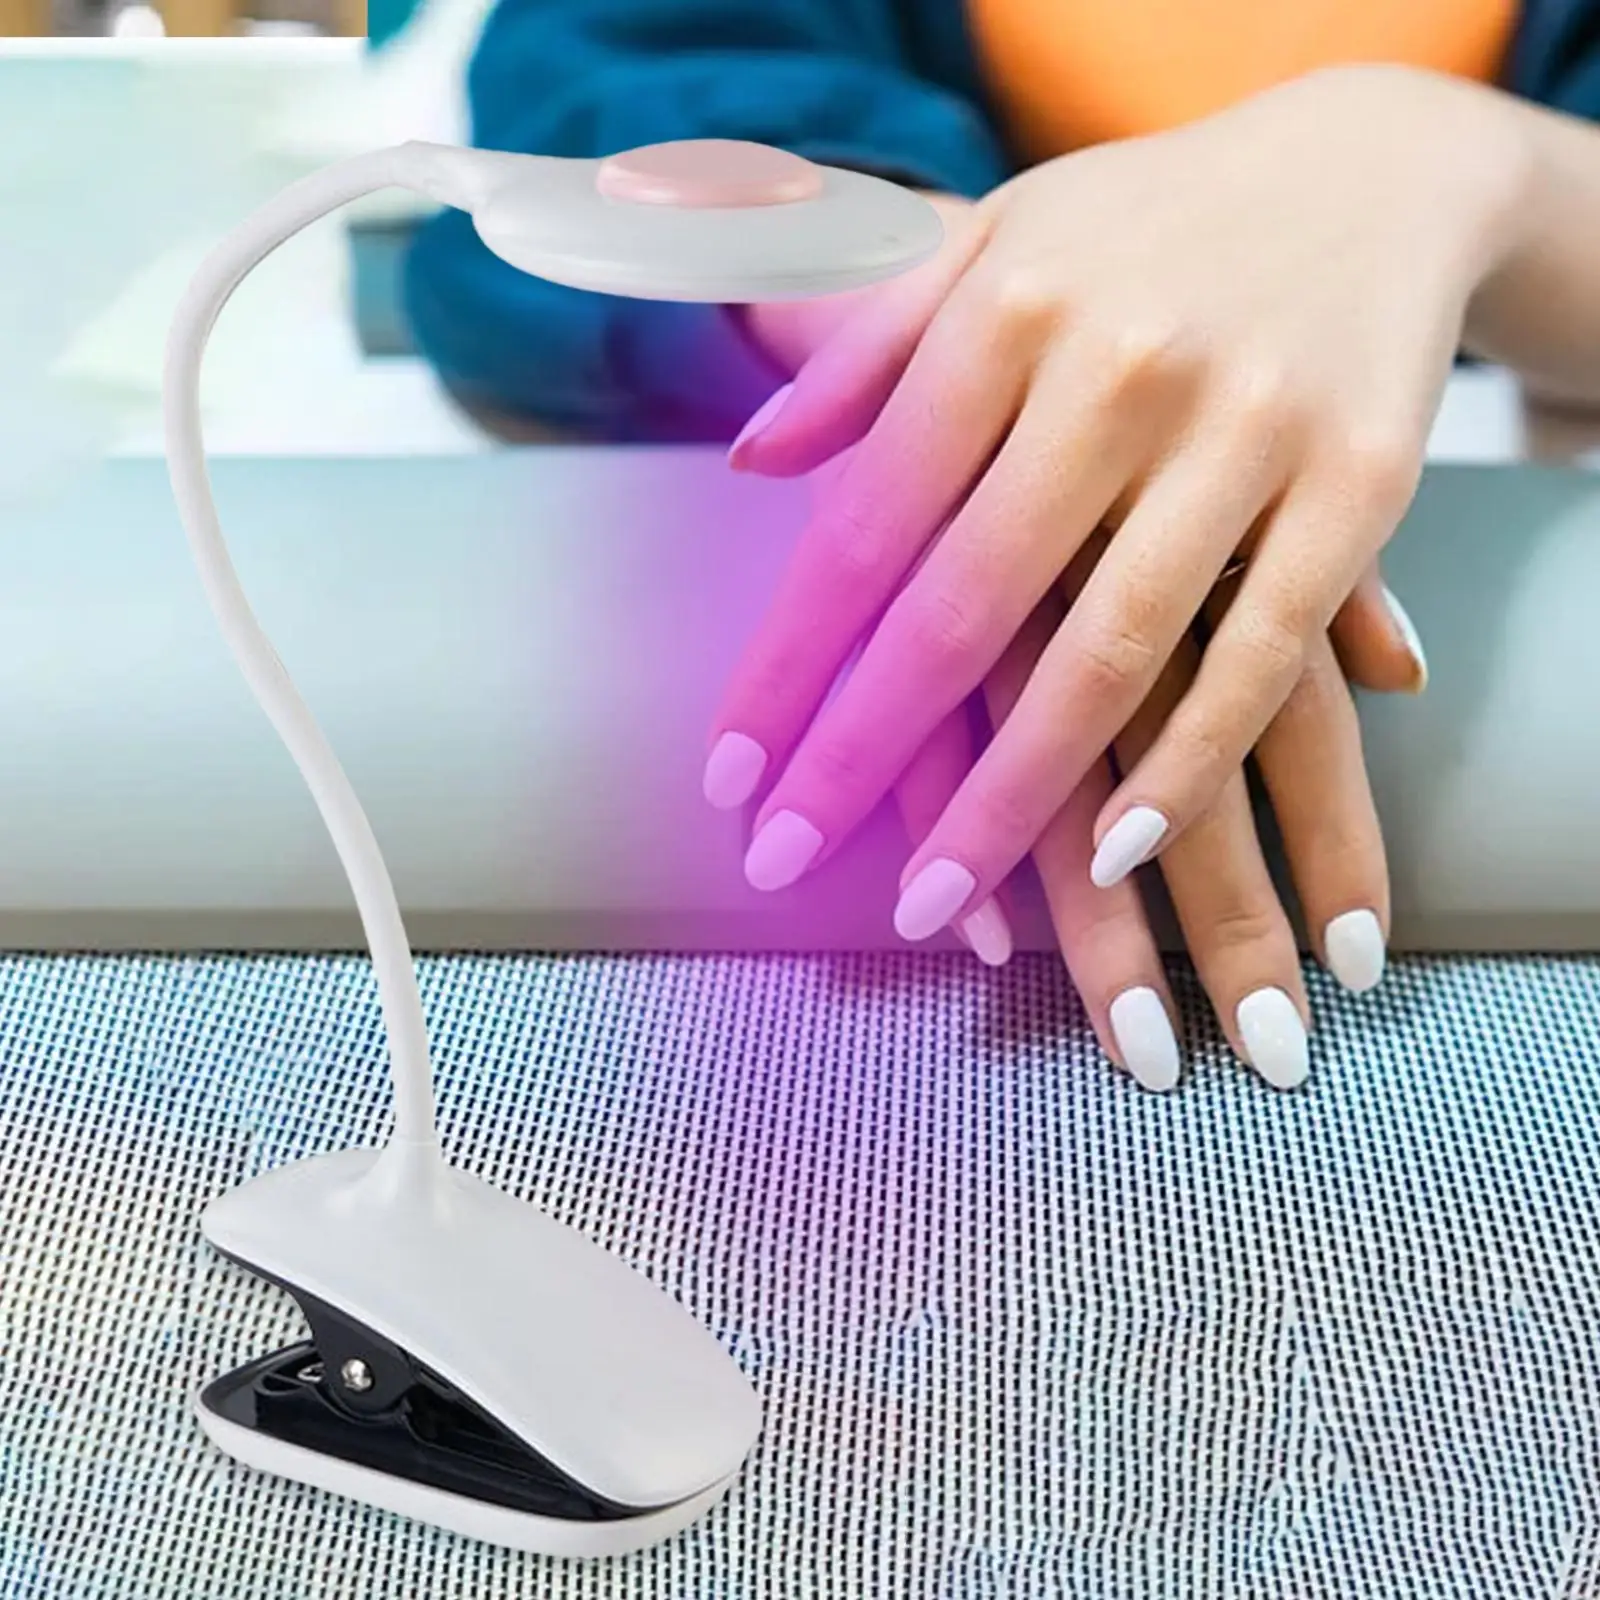 LED UV Nail Lamp Quick Dry Nail Dryer for Gel Nail Home Salon Manicure Decor